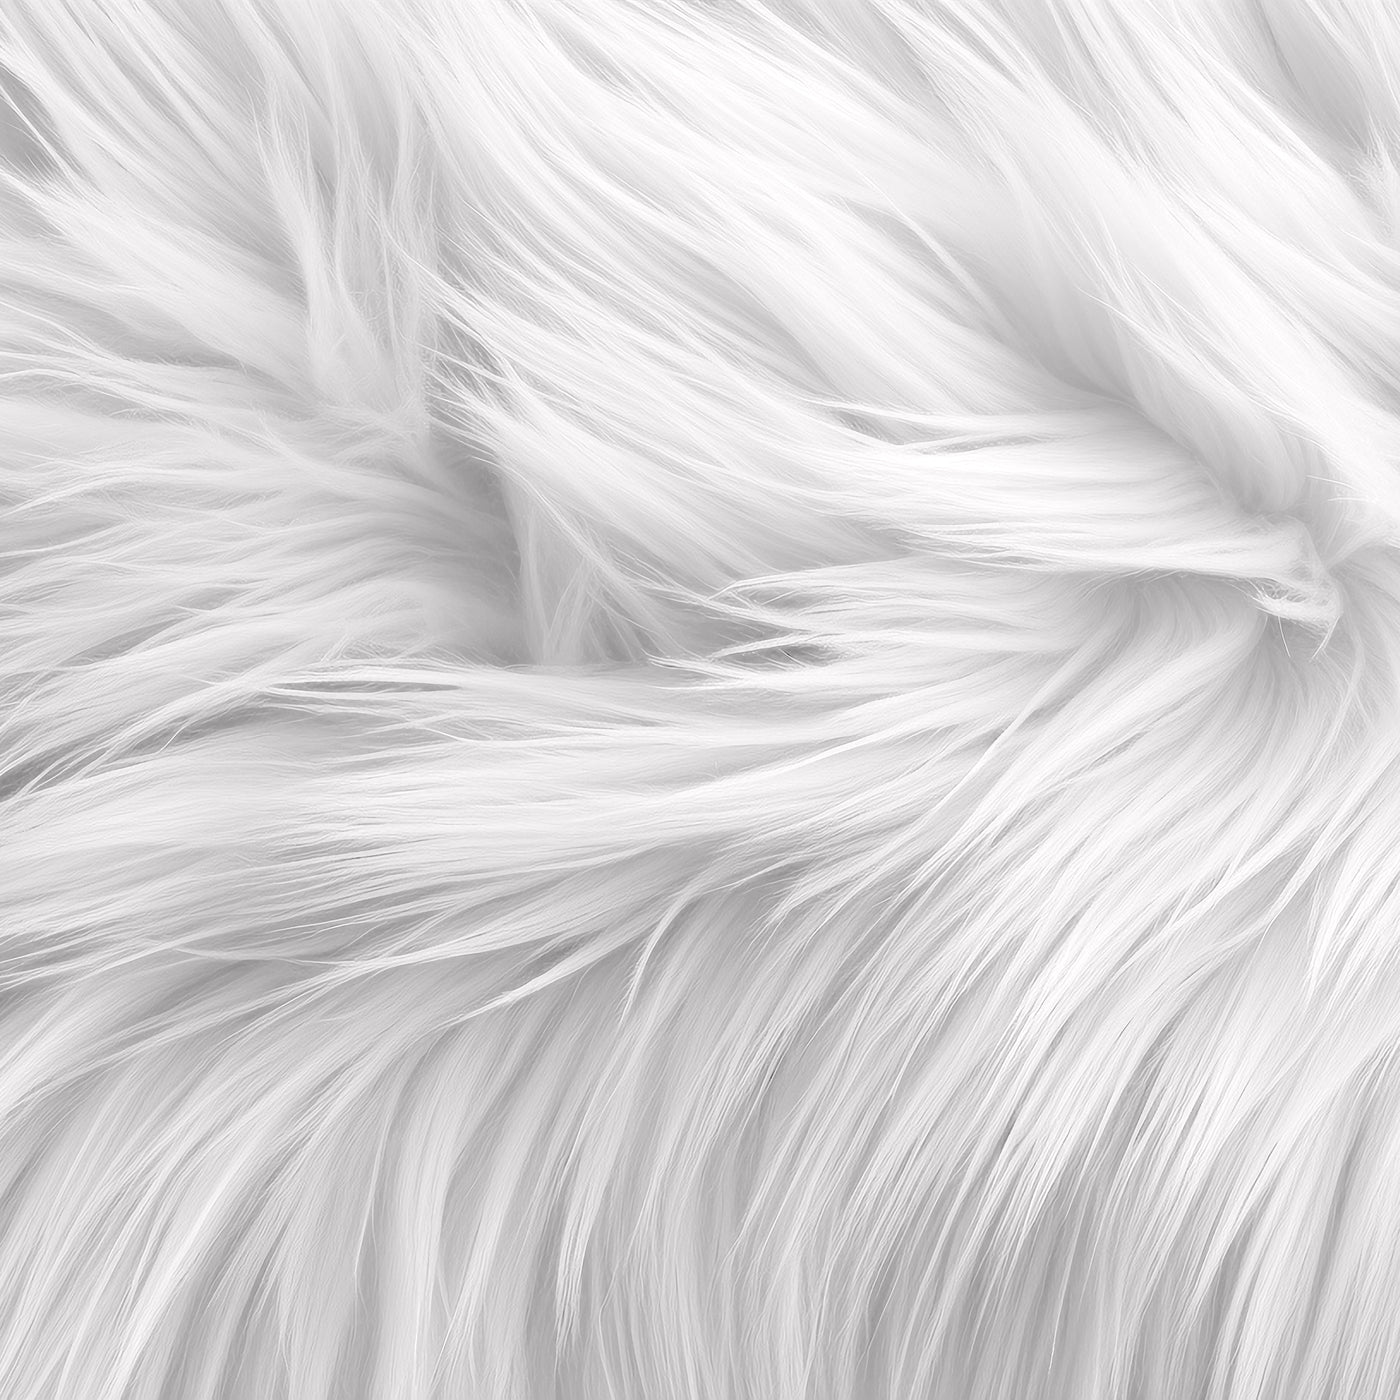 FabricLA Shaggy Faux Fur Fabric by The Yard for Art & Craft Supply | Many Colors - FabricLA.com